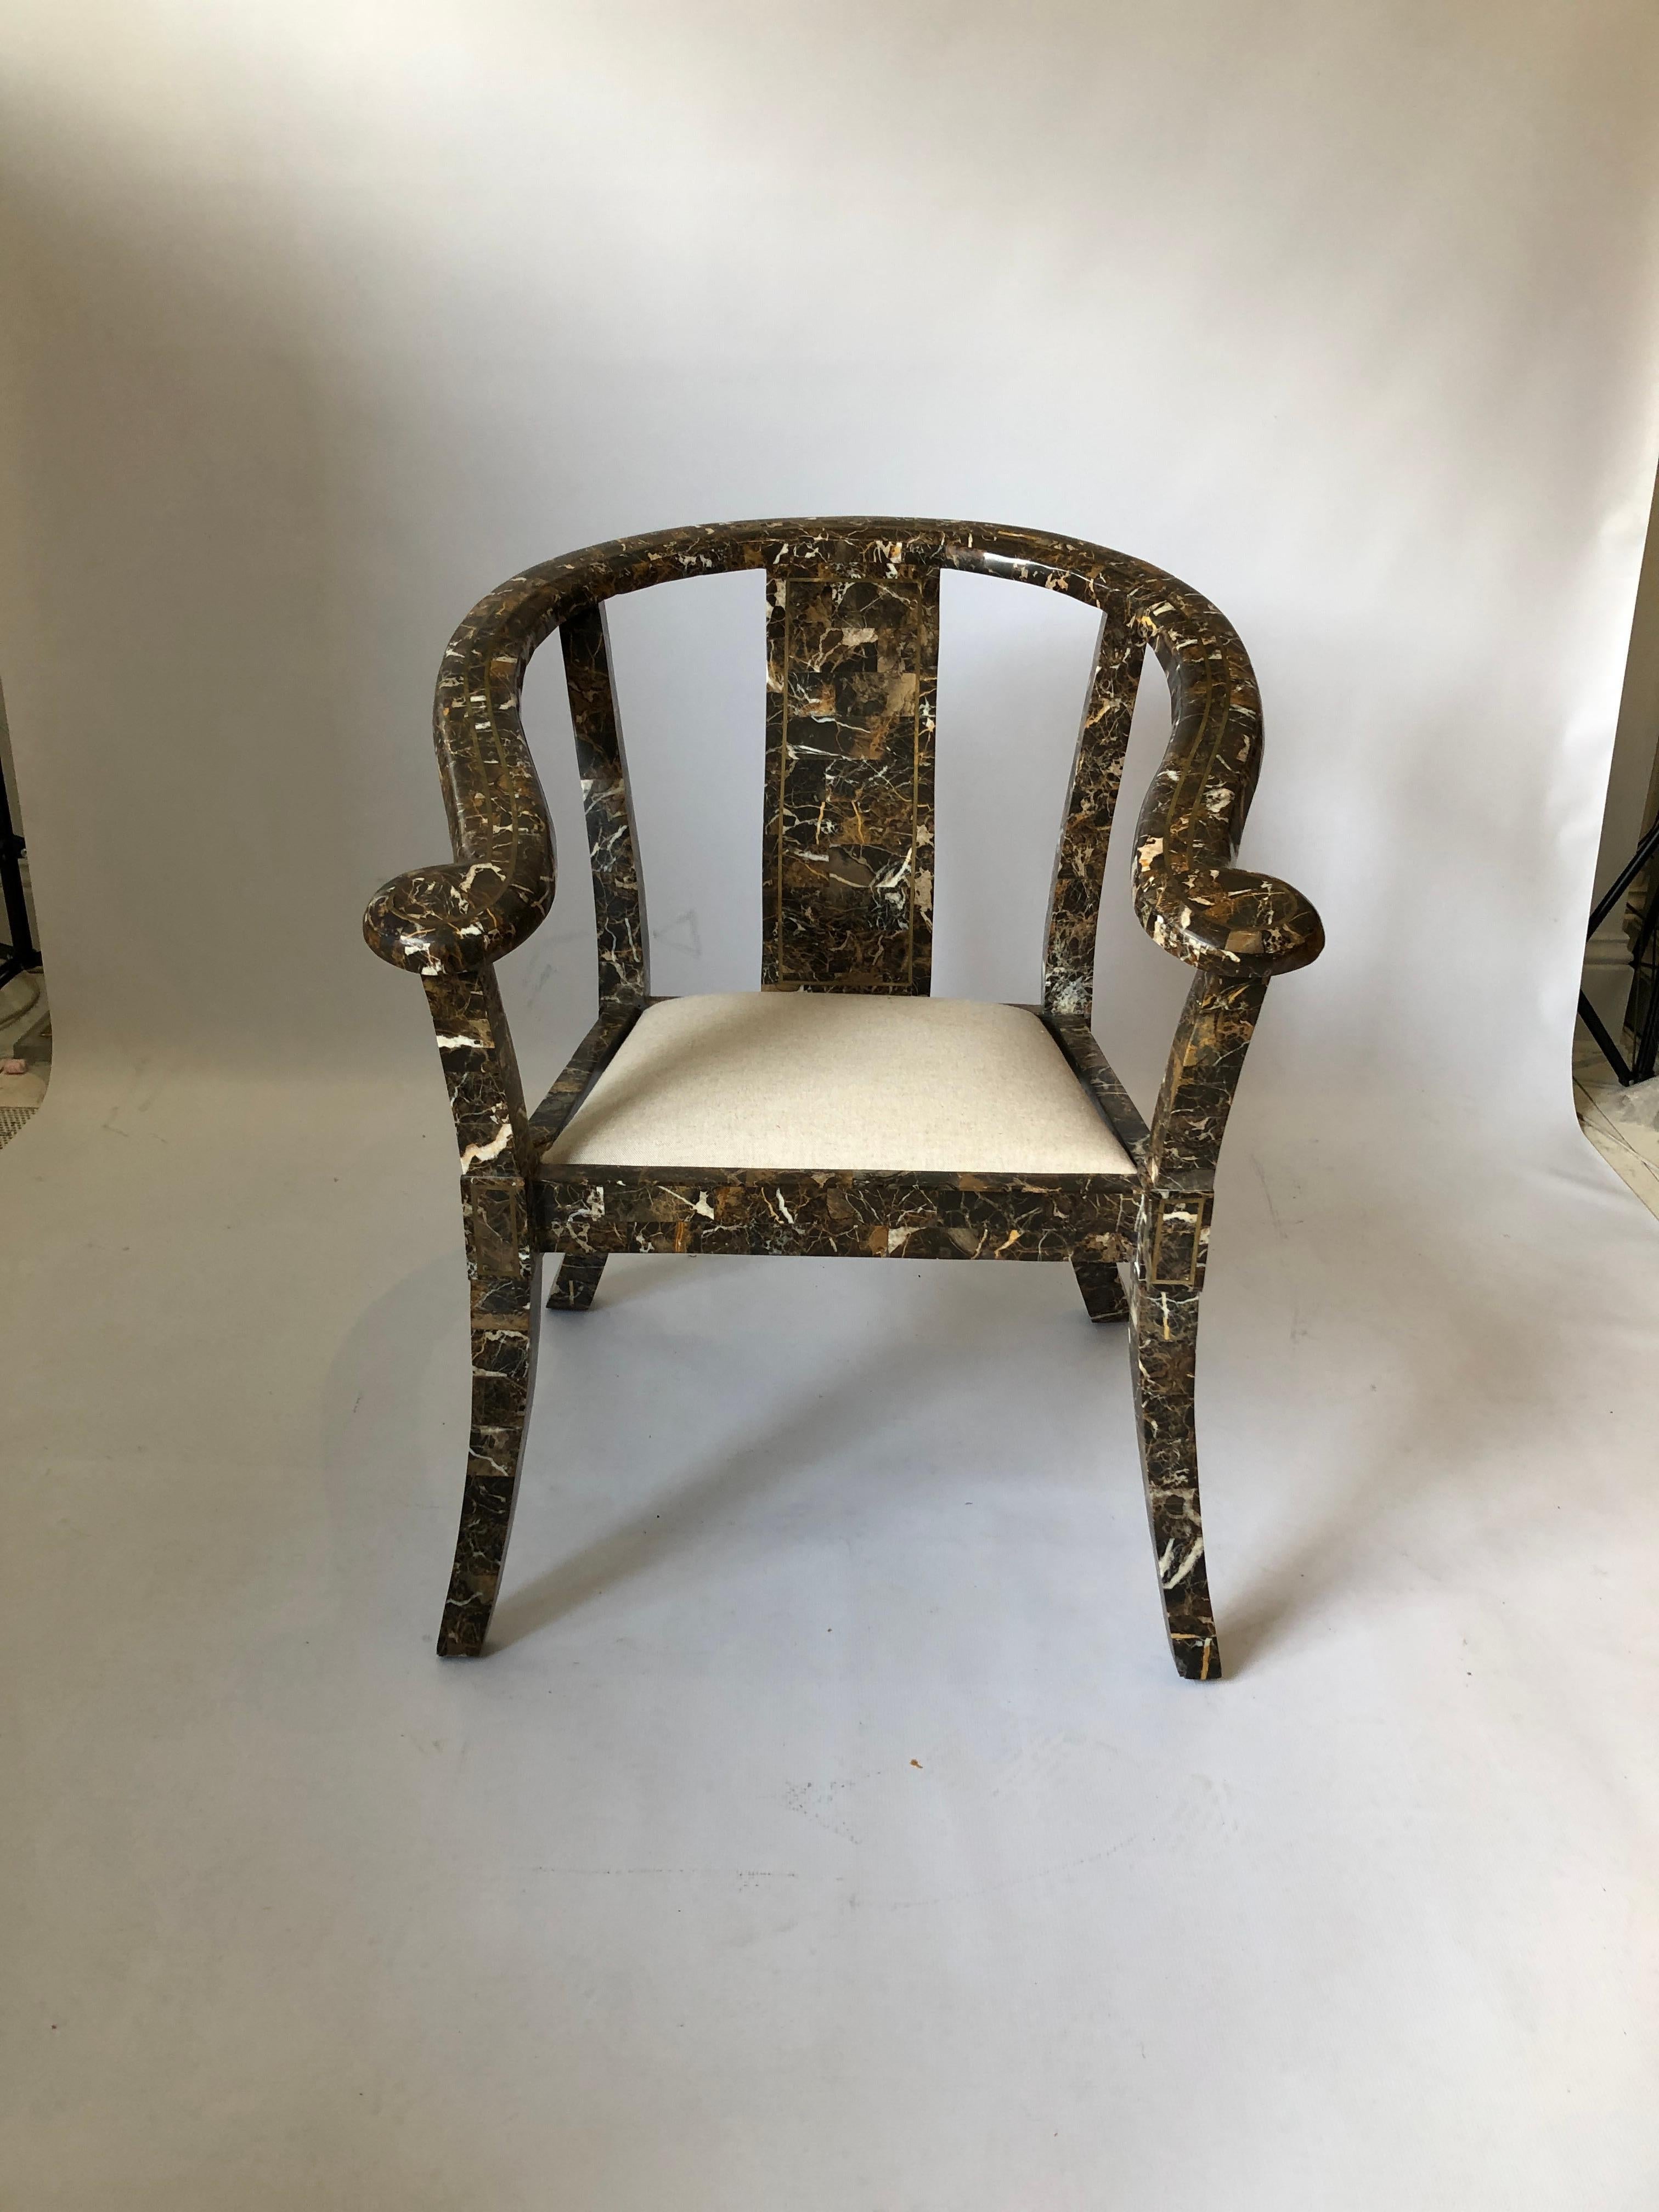 A beautifully 1970s marble carver side chair from Maitland-Smith, the renowned American furniture company. Marble chinoiserie inspired frame with brass inlay and gently curved corners, all finished in a wonderful tessellated black and brown pattern